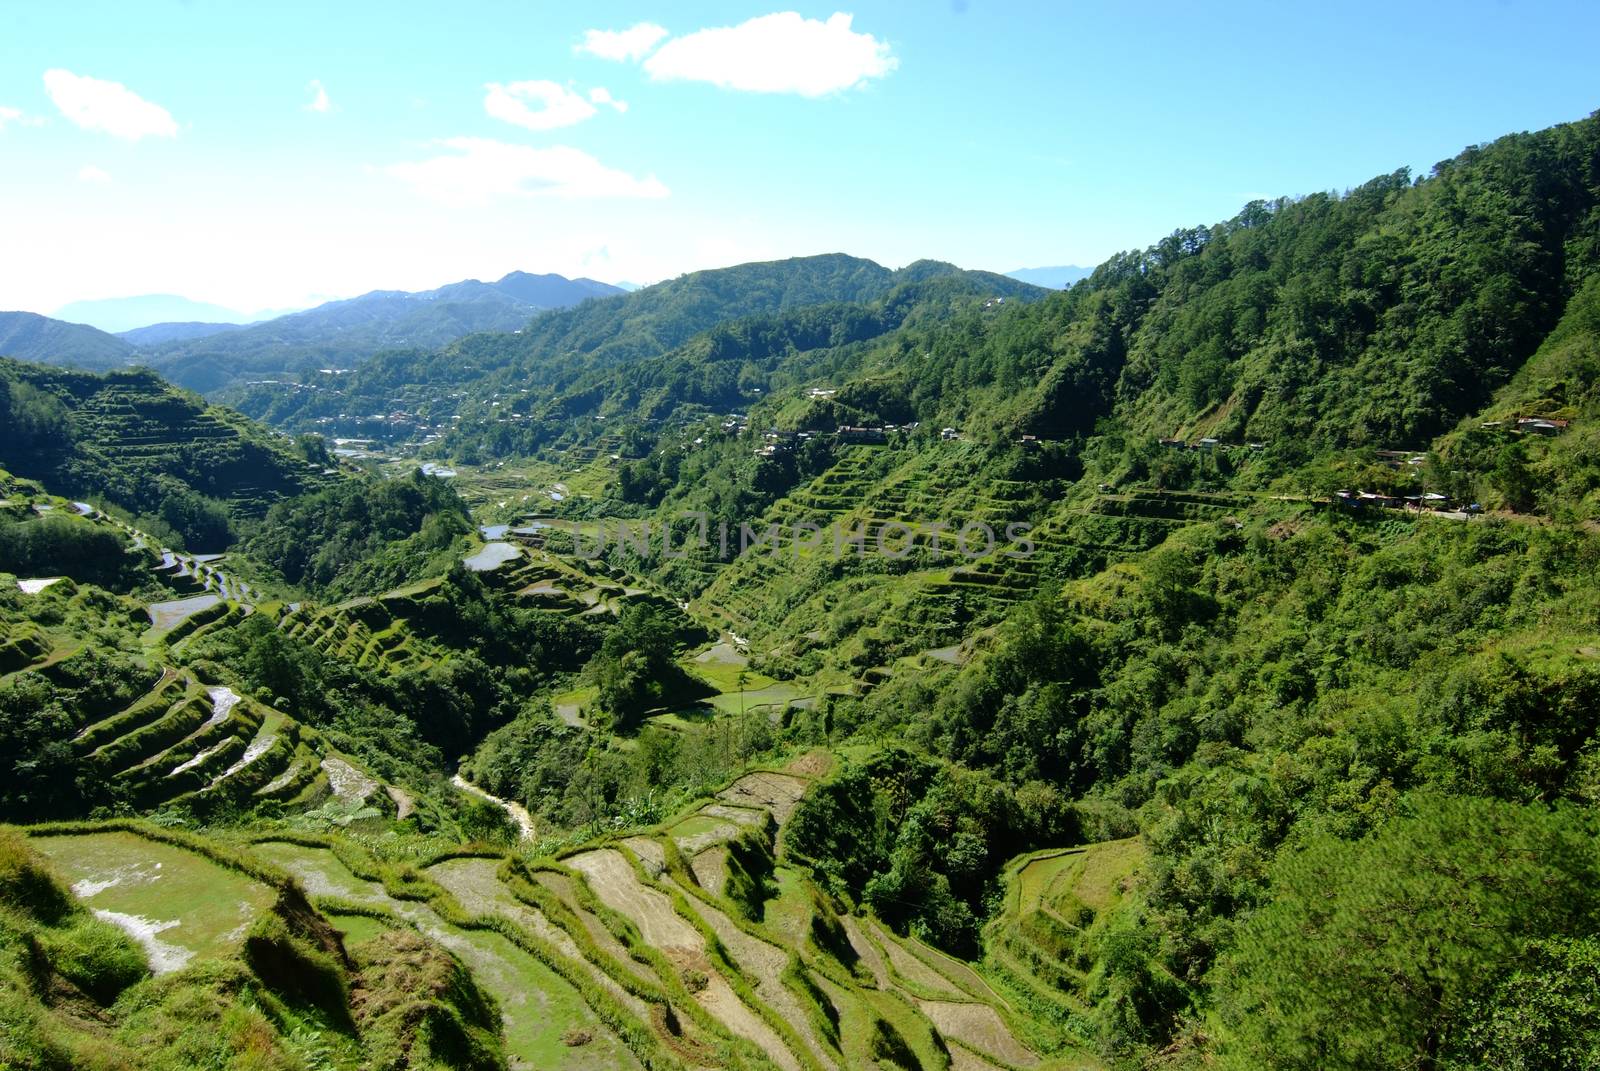 Rice terraces in the Philippines. The village is in a valley among the rice terraces. Rice cultivation in the North of the Philippines Batad Banaue.